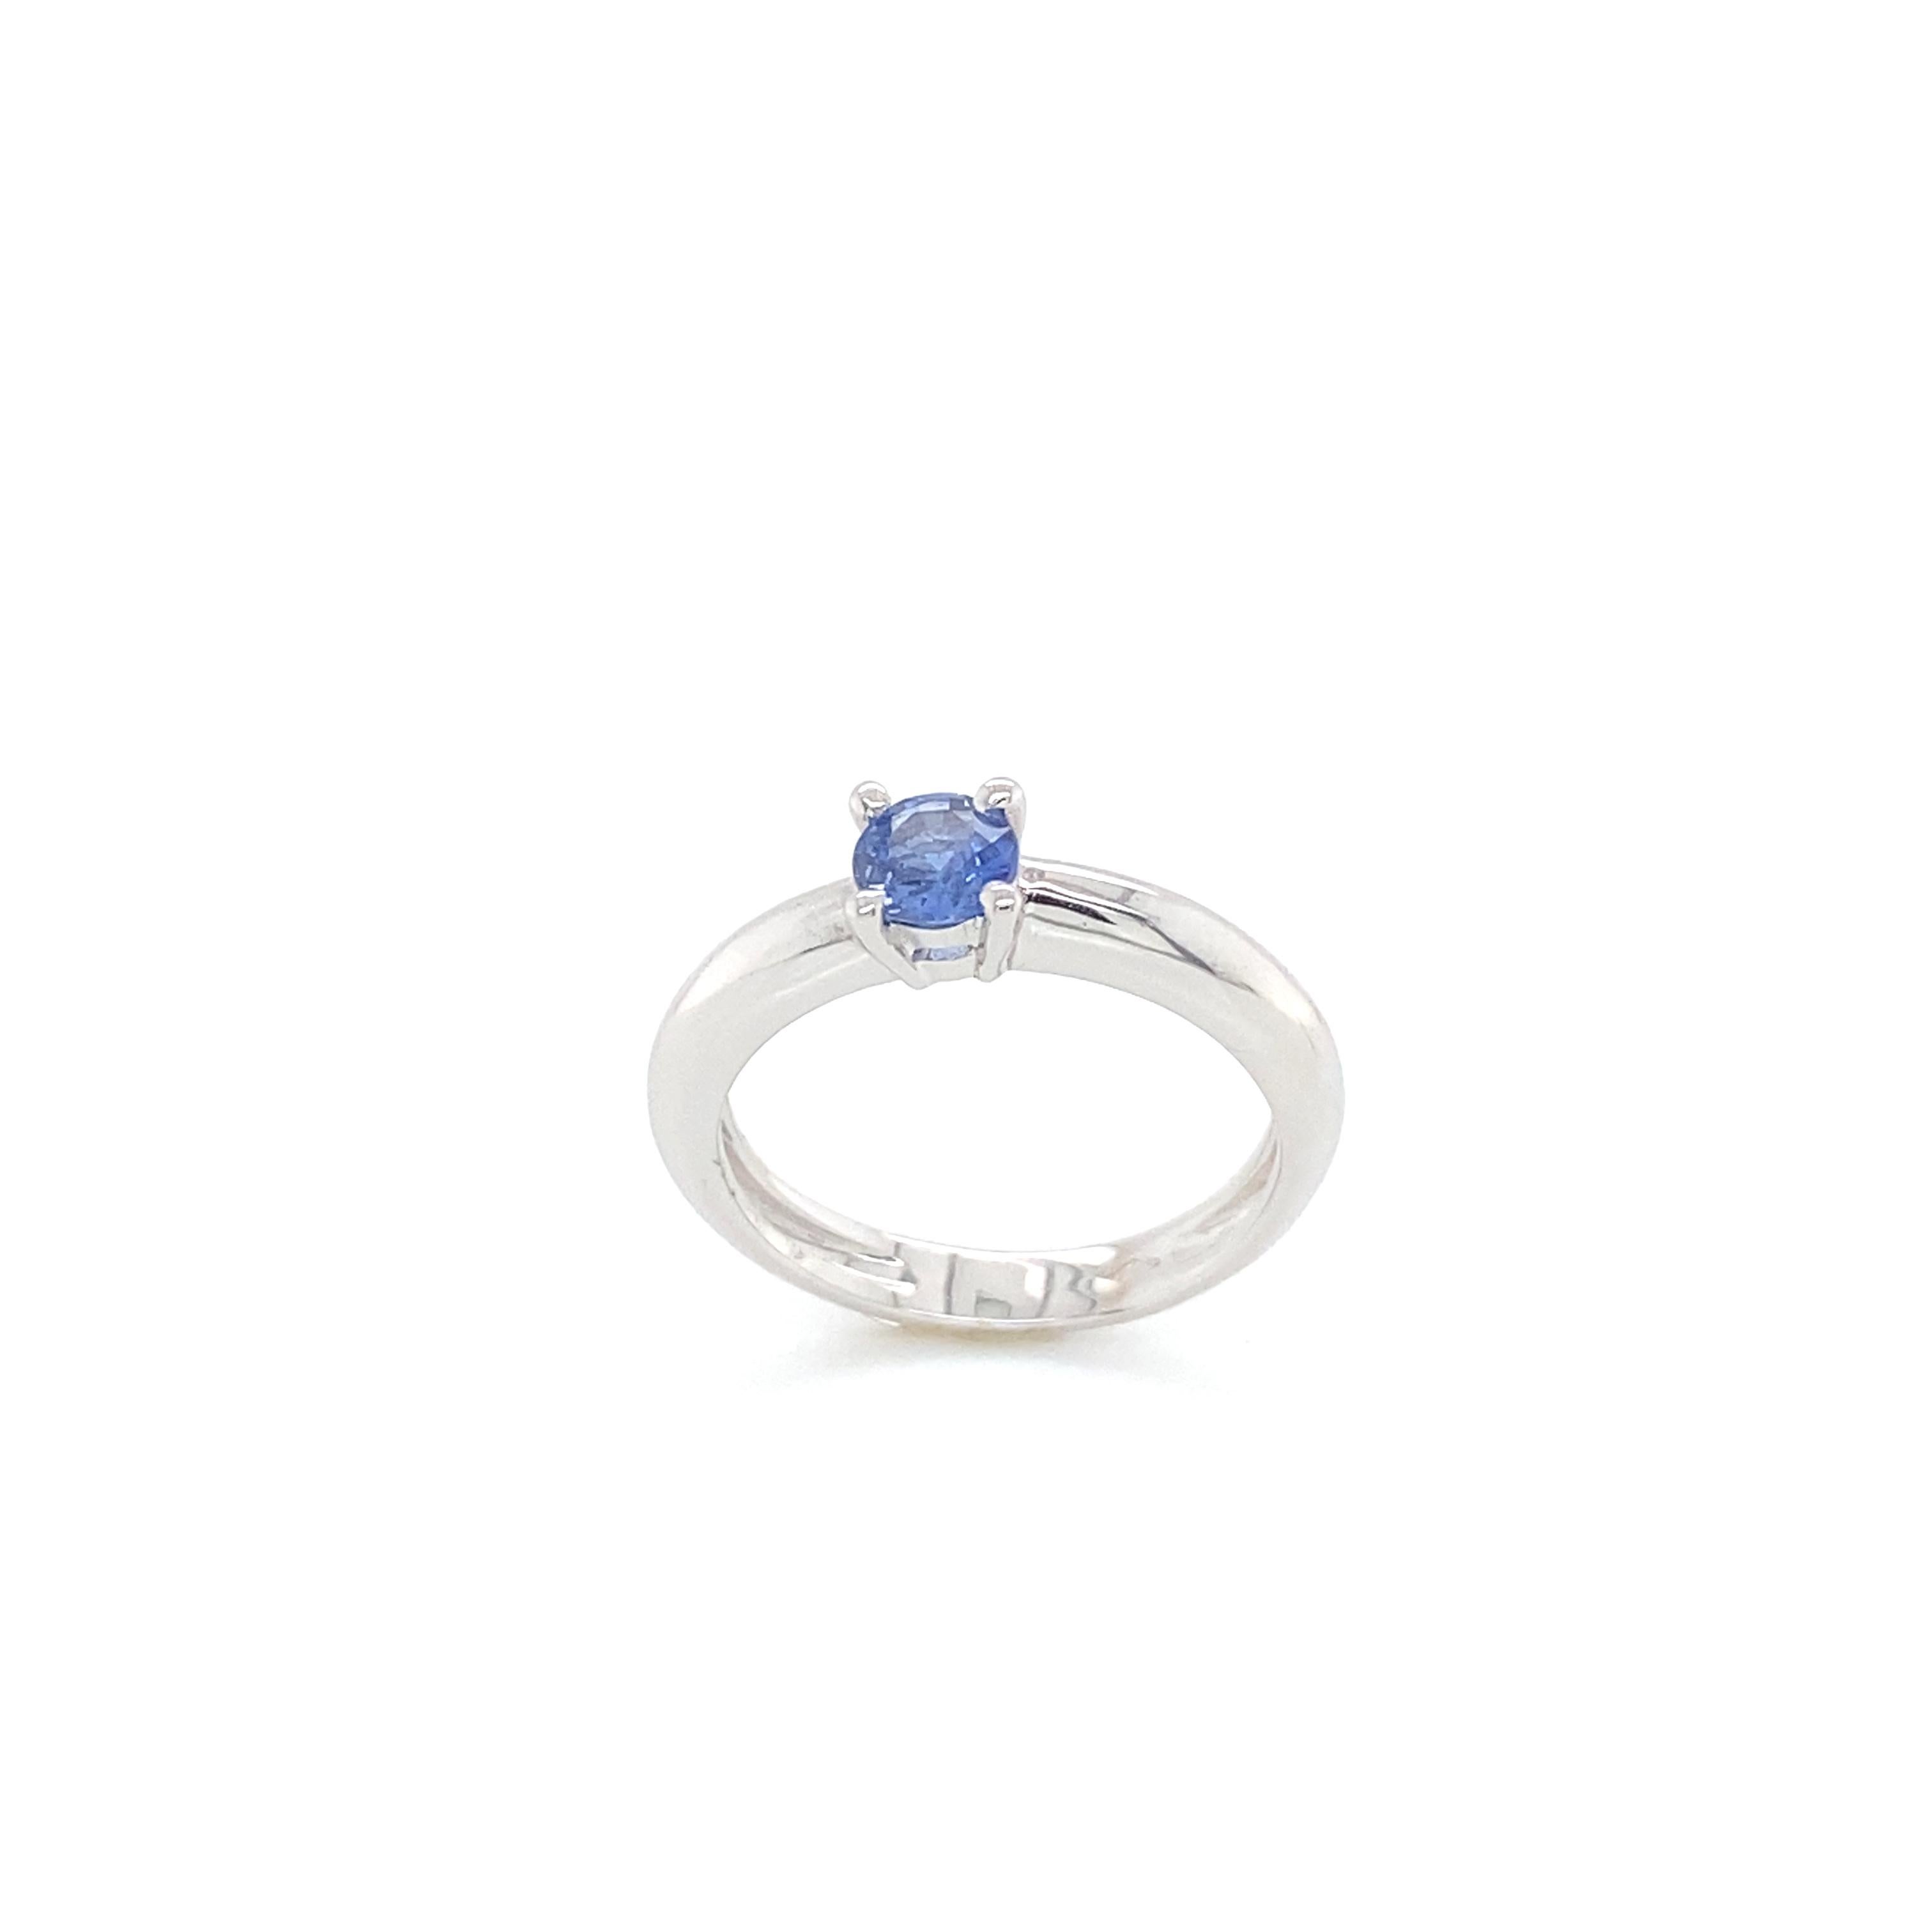 Discover the ultimate symbol of love and elegance with this sumptuous Ceylon sapphire solitaire ring, set in an 18k white gold band. This jewelry creation is a tribute to the timeless beauty of sapphire and the nobility of gold, an alliance that